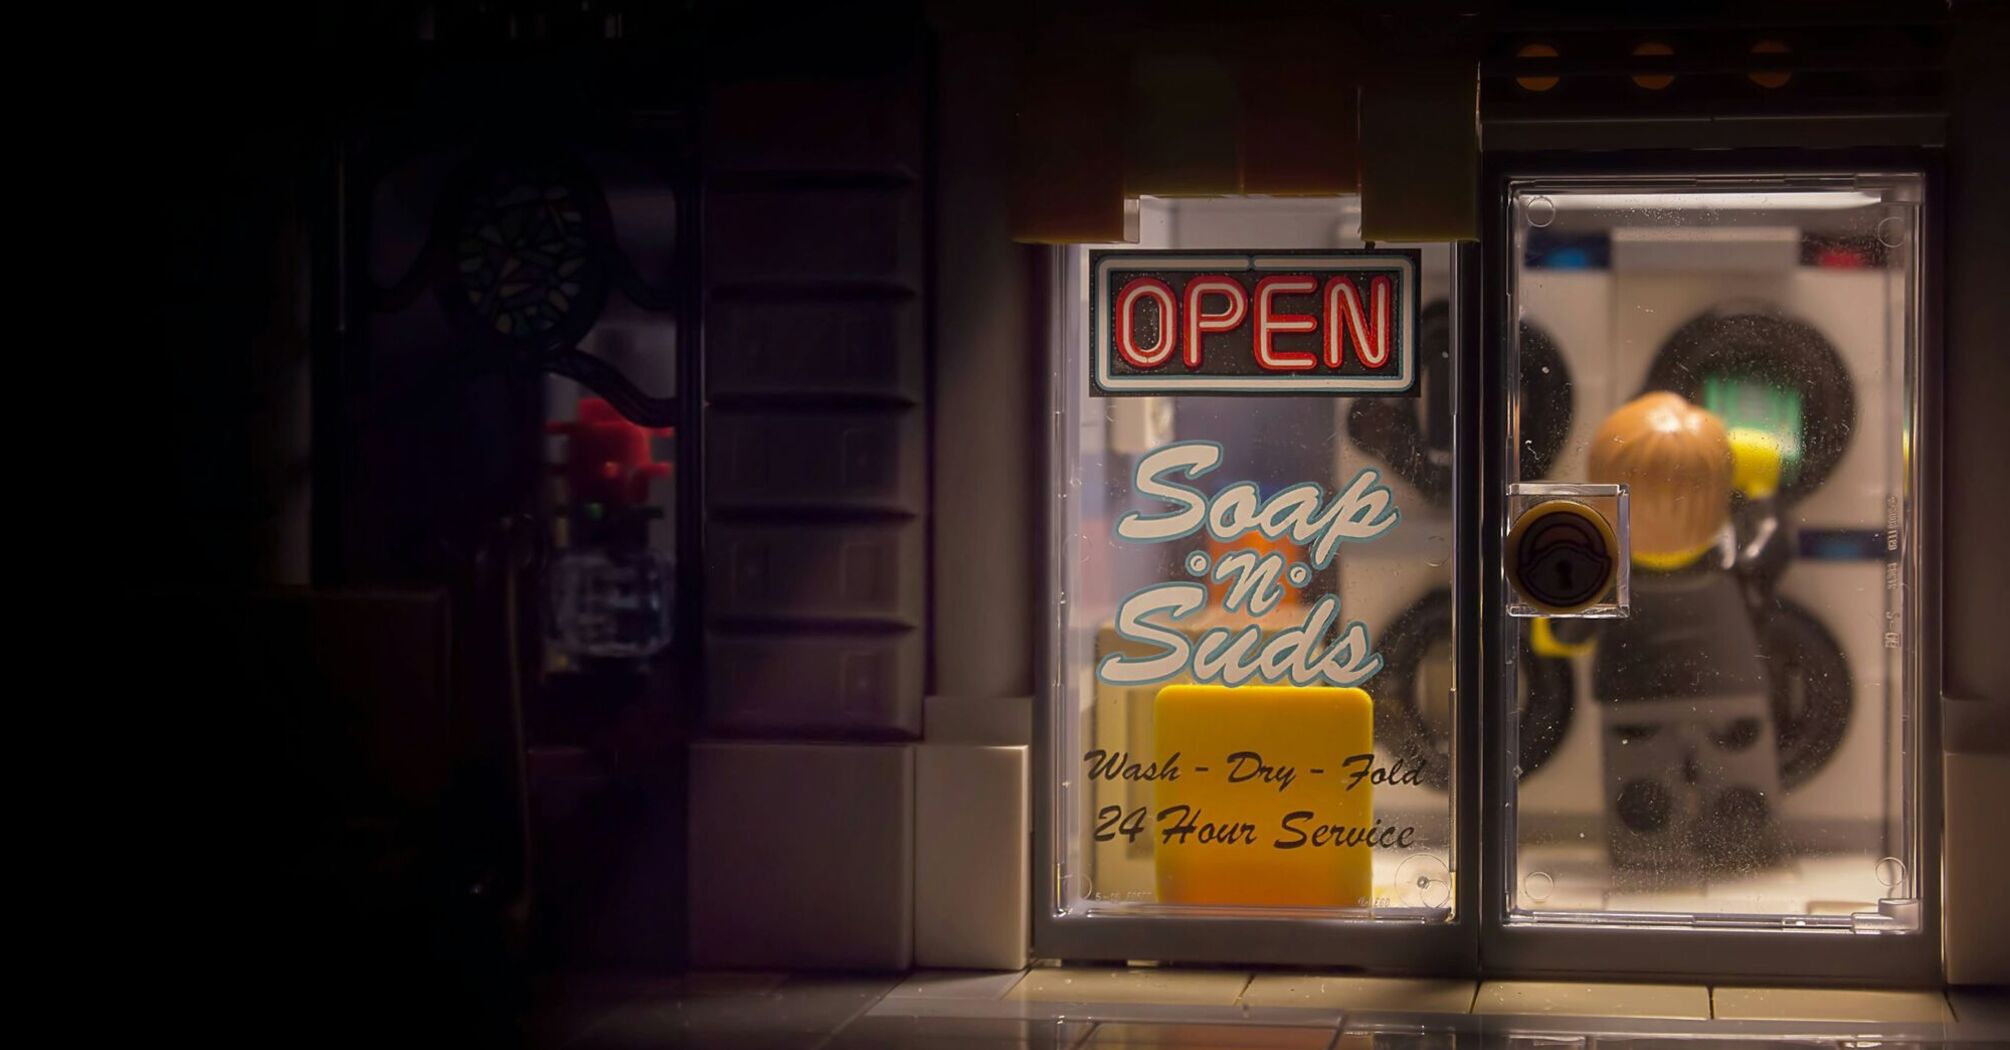 A warmly lit storefront window at night with a neon 'OPEN' sign